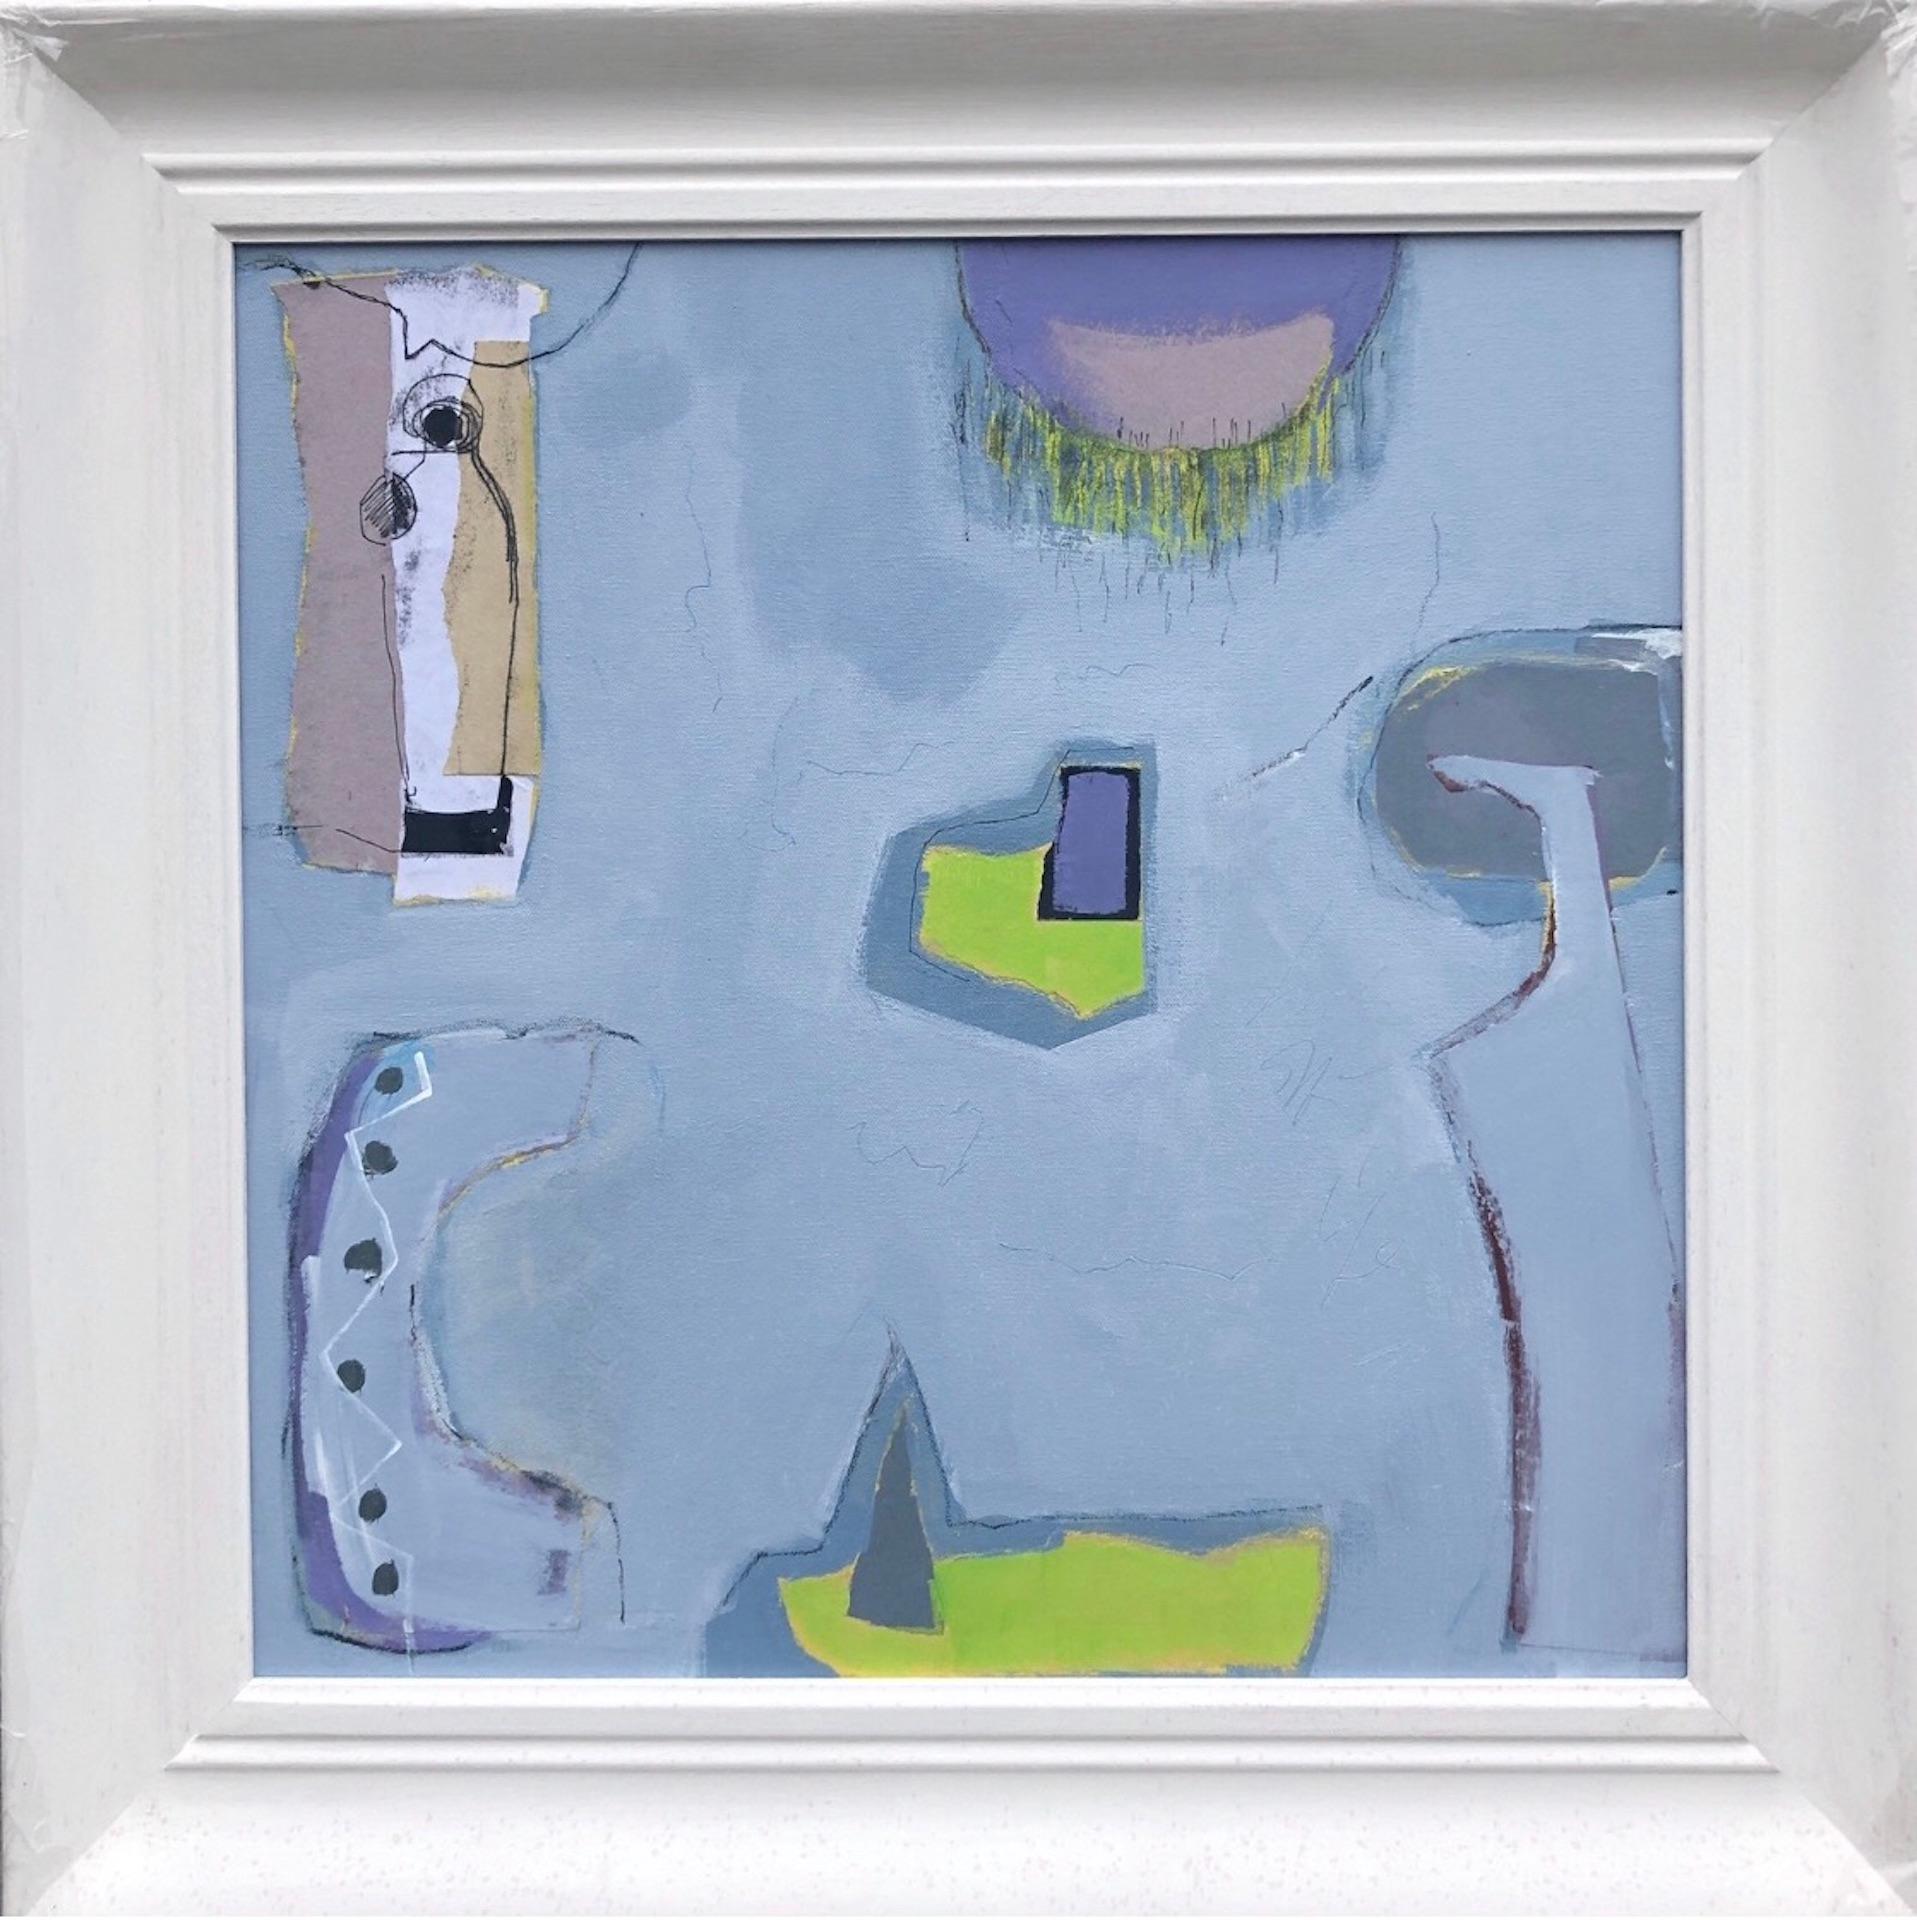 Maggie LaPorte Banks.
Changing blues to greys.
Acrylic, Monoprint, Collage, Carborundum on Canvas.
Canvas Size: H 65cm x W 65cm x D 5 cm
Sold in a White Wood Frame.
Please note that in situ images are purely an indication of how a piece may